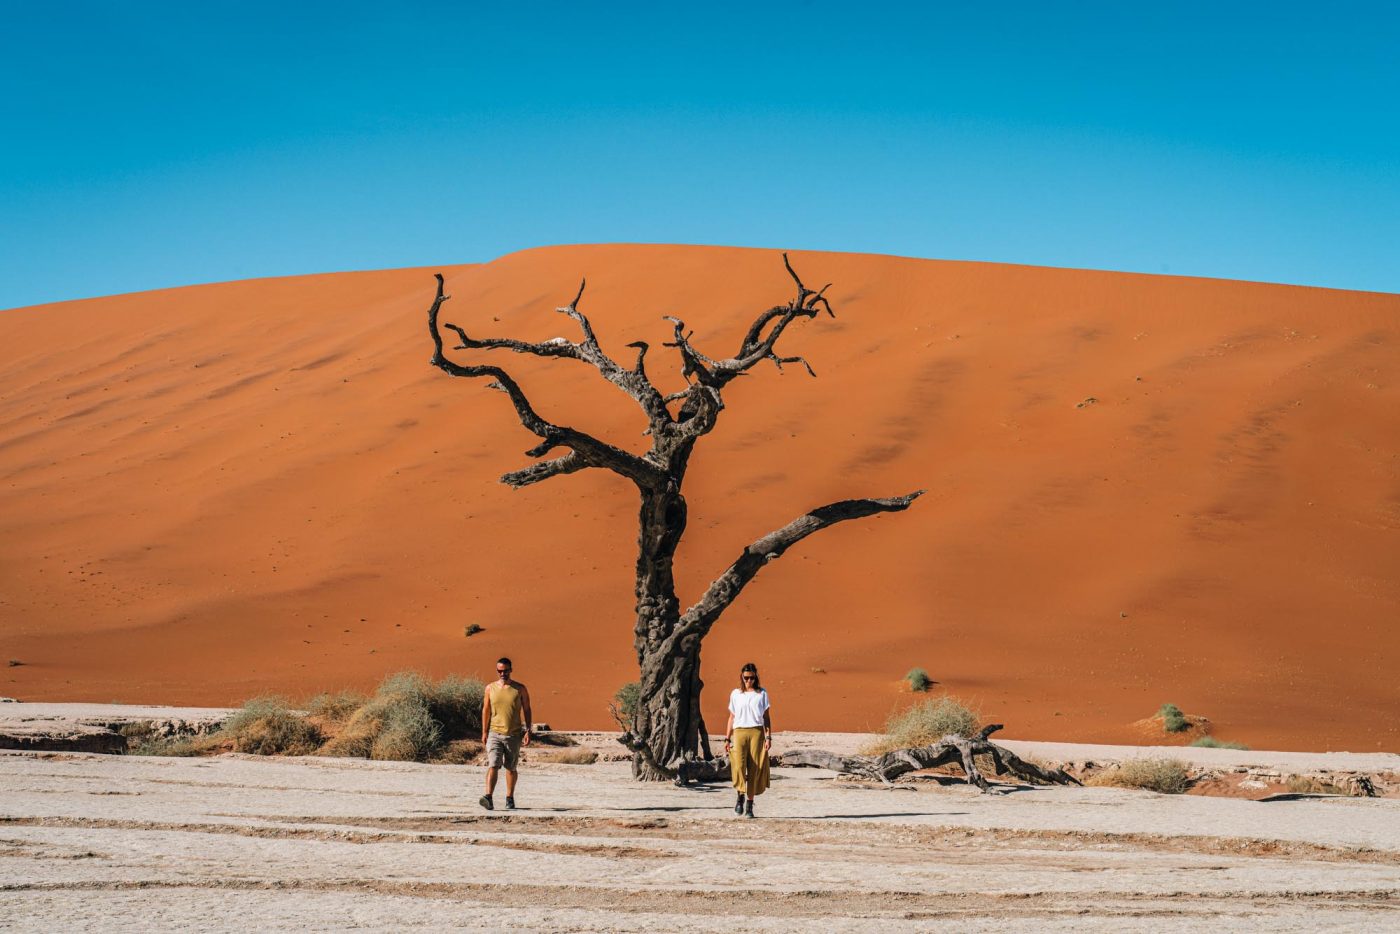 Deadvlei, Sossusvlei - the most iconic destination in Namibia